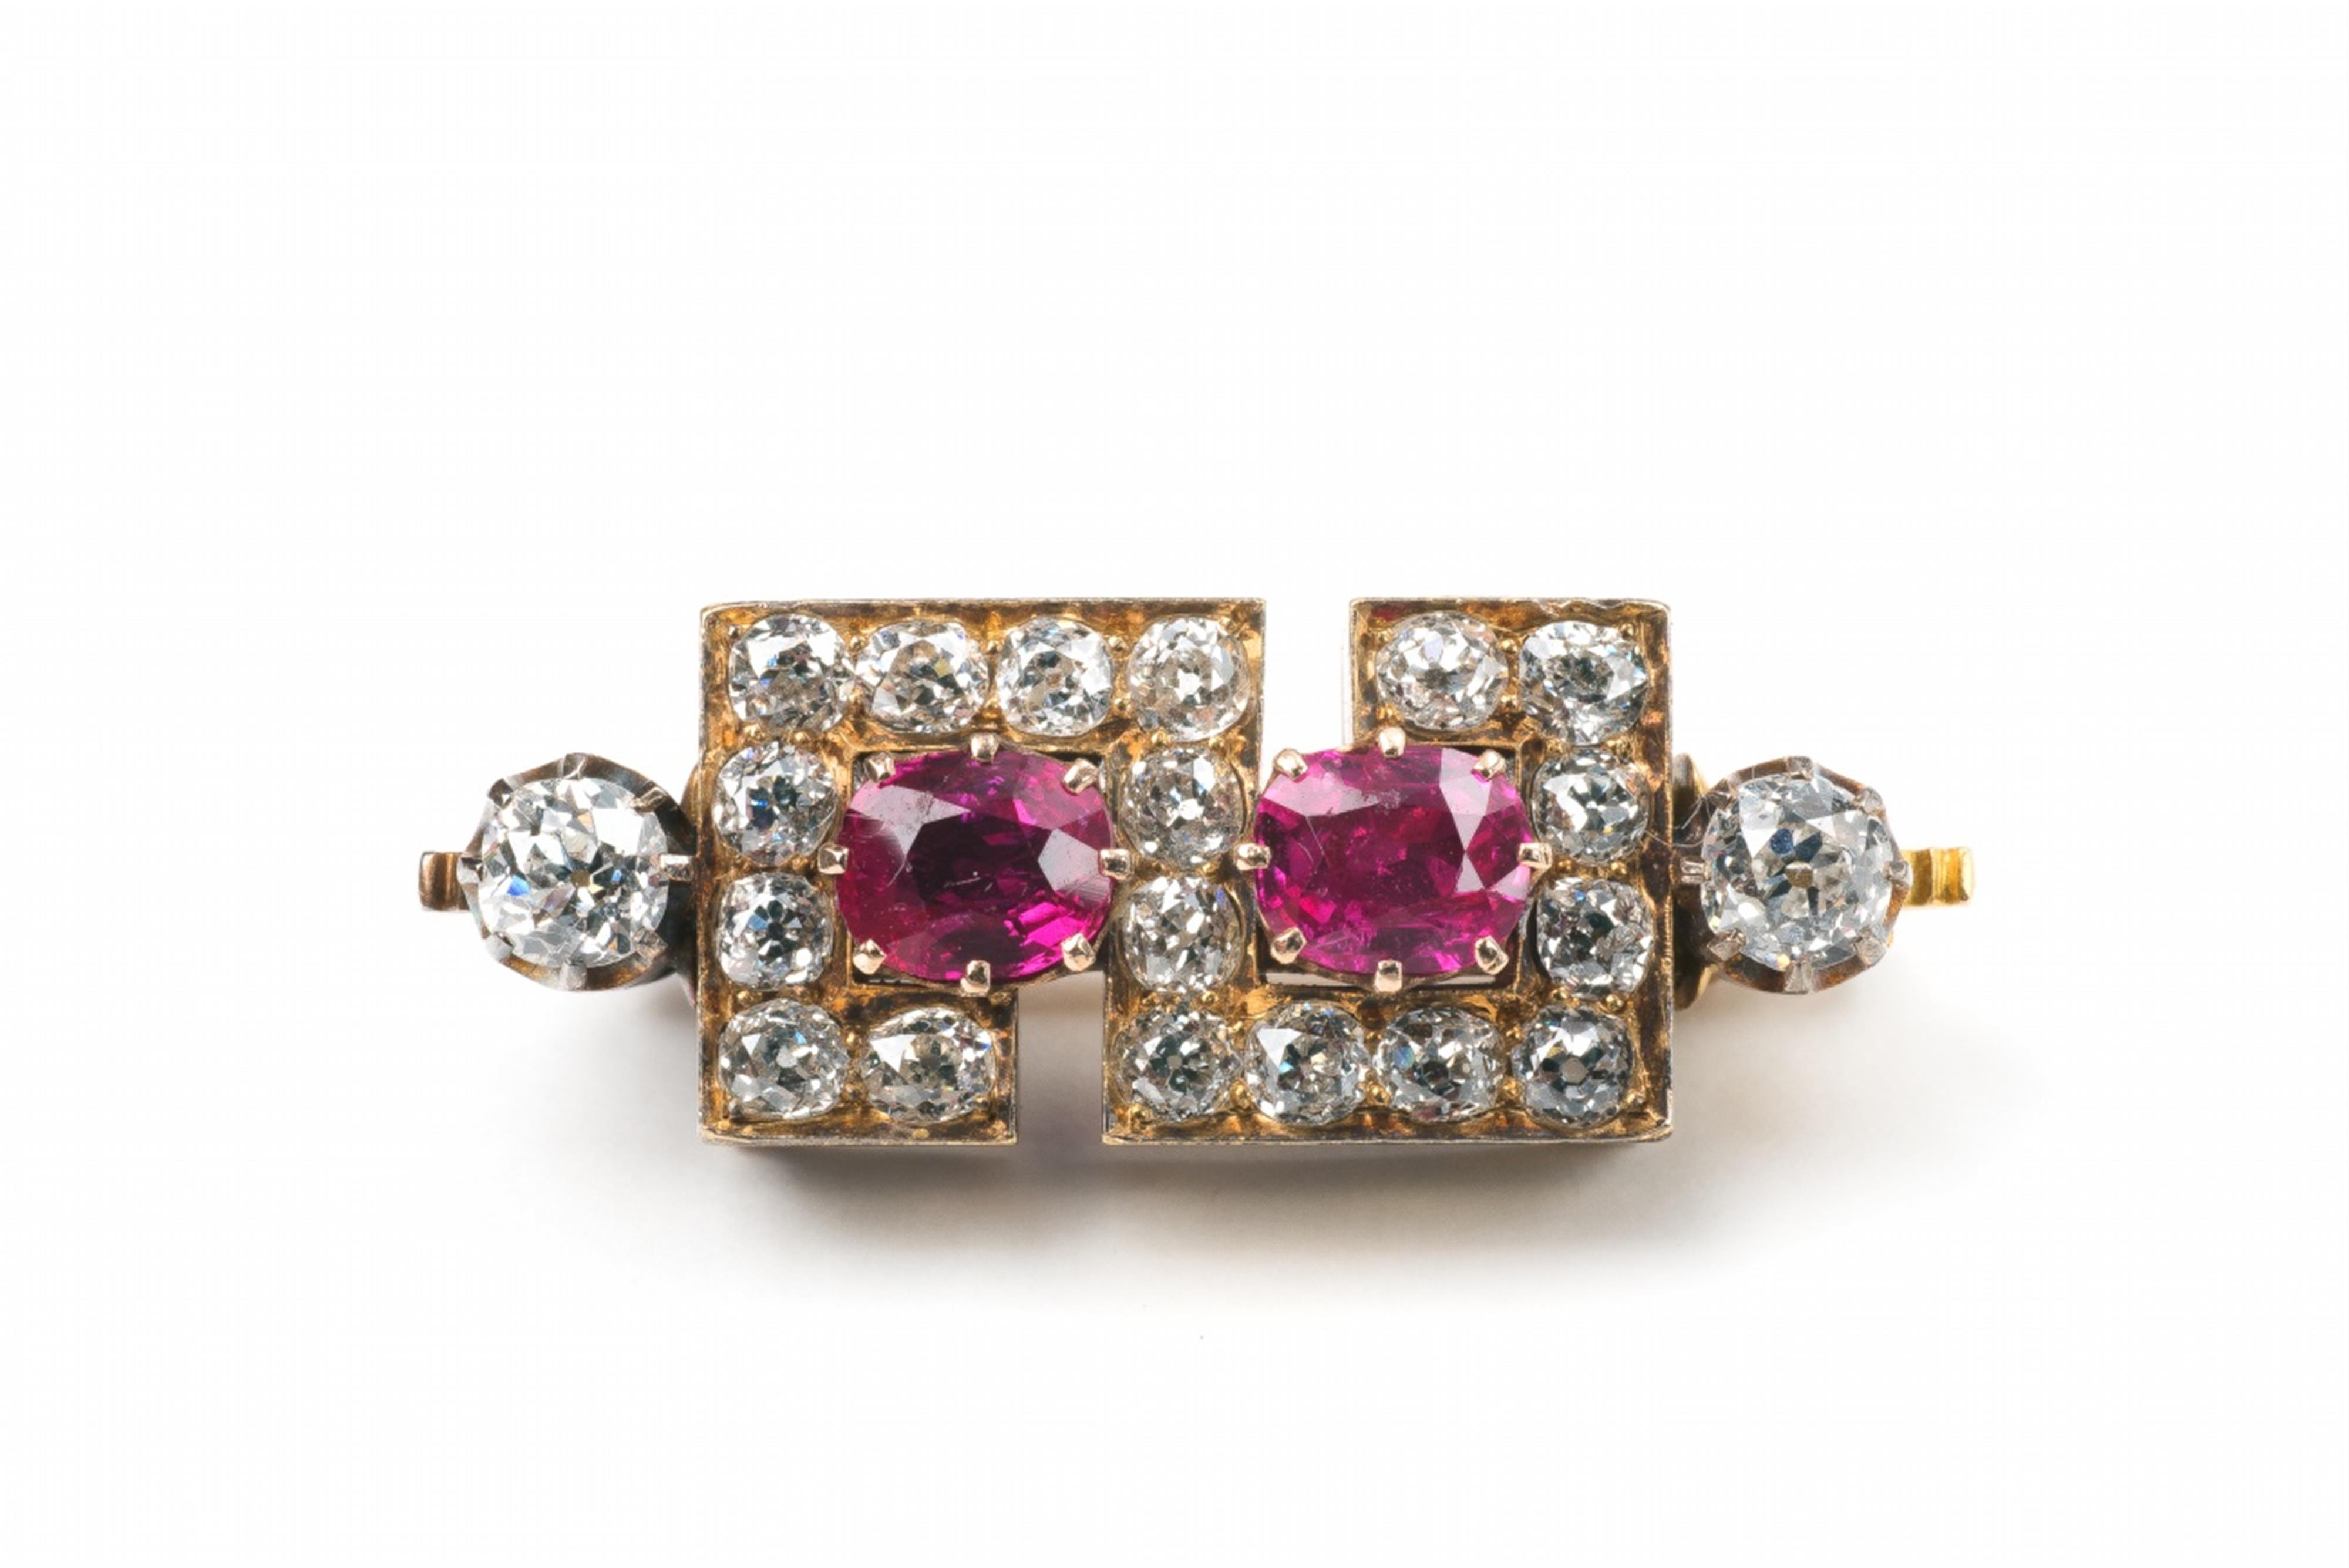 A 14k gold diamond and ruby brooch - image-1